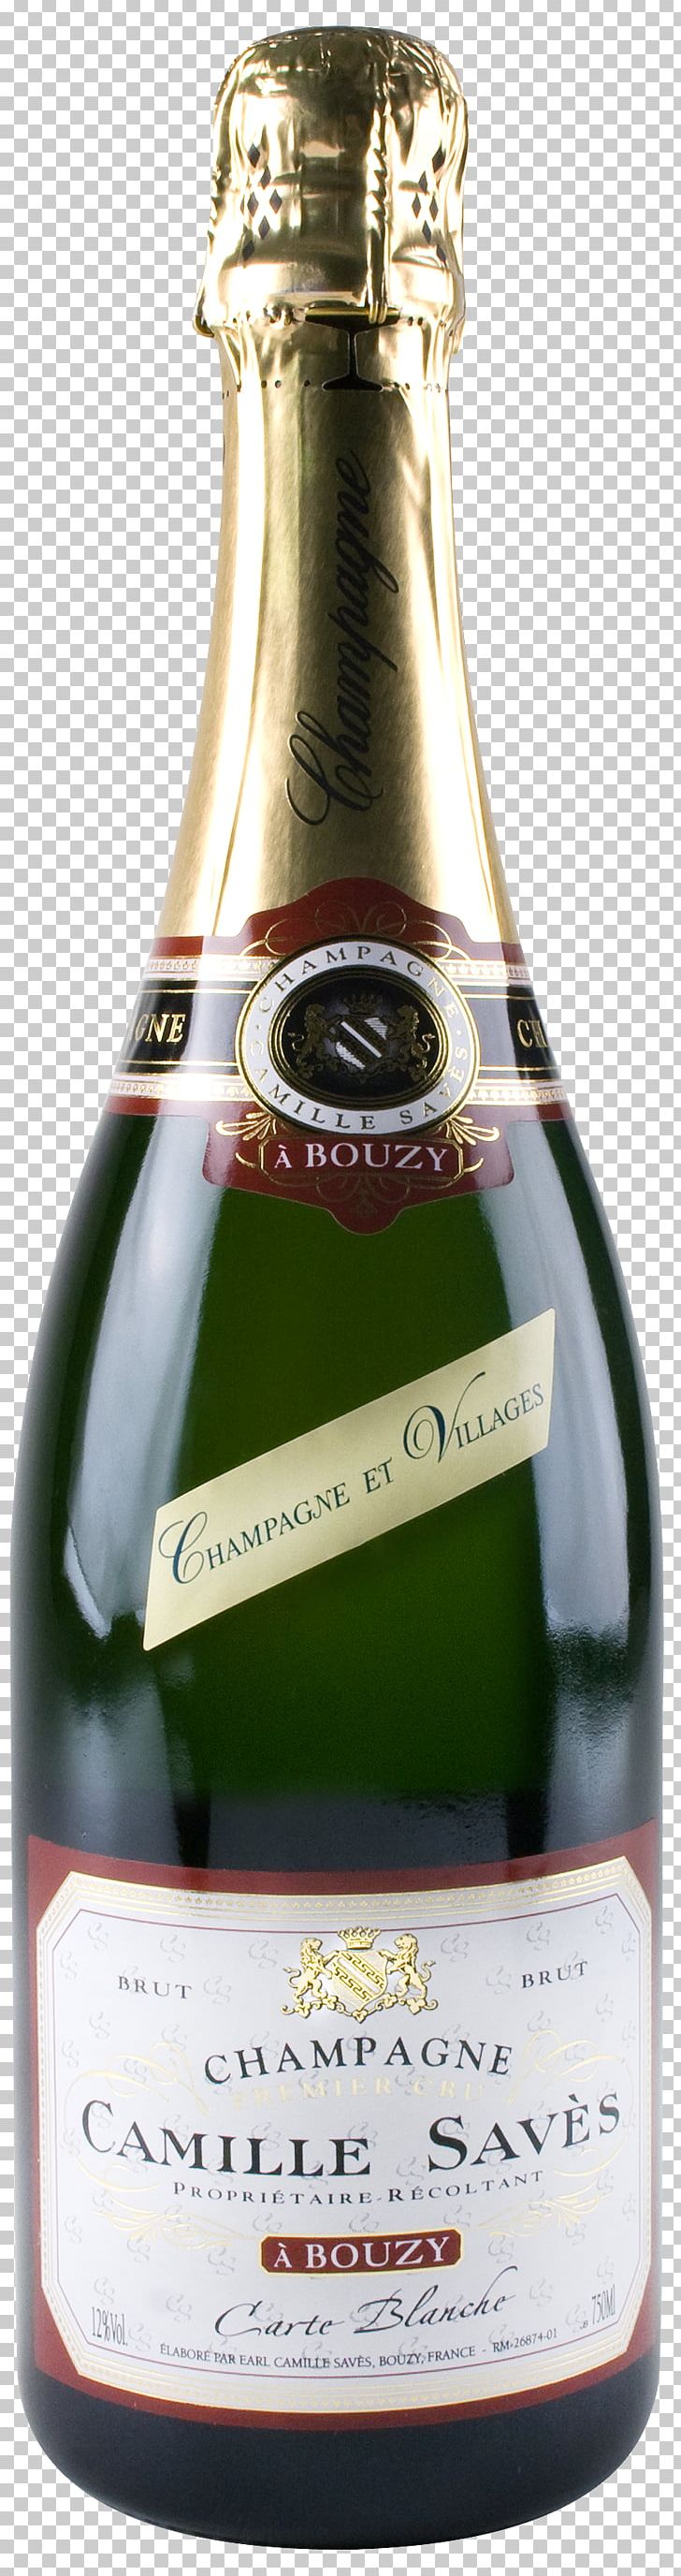 Camille Savès Brut Champagne Carte Blanche 1er Cru NV Wine Liqueur Camille Savès Brut Champagne Carte Blanche 1er Cru NV PNG, Clipart, Alcoholic Beverage, Bottle, Brut, Champagne, Distilled Beverage Free PNG Download